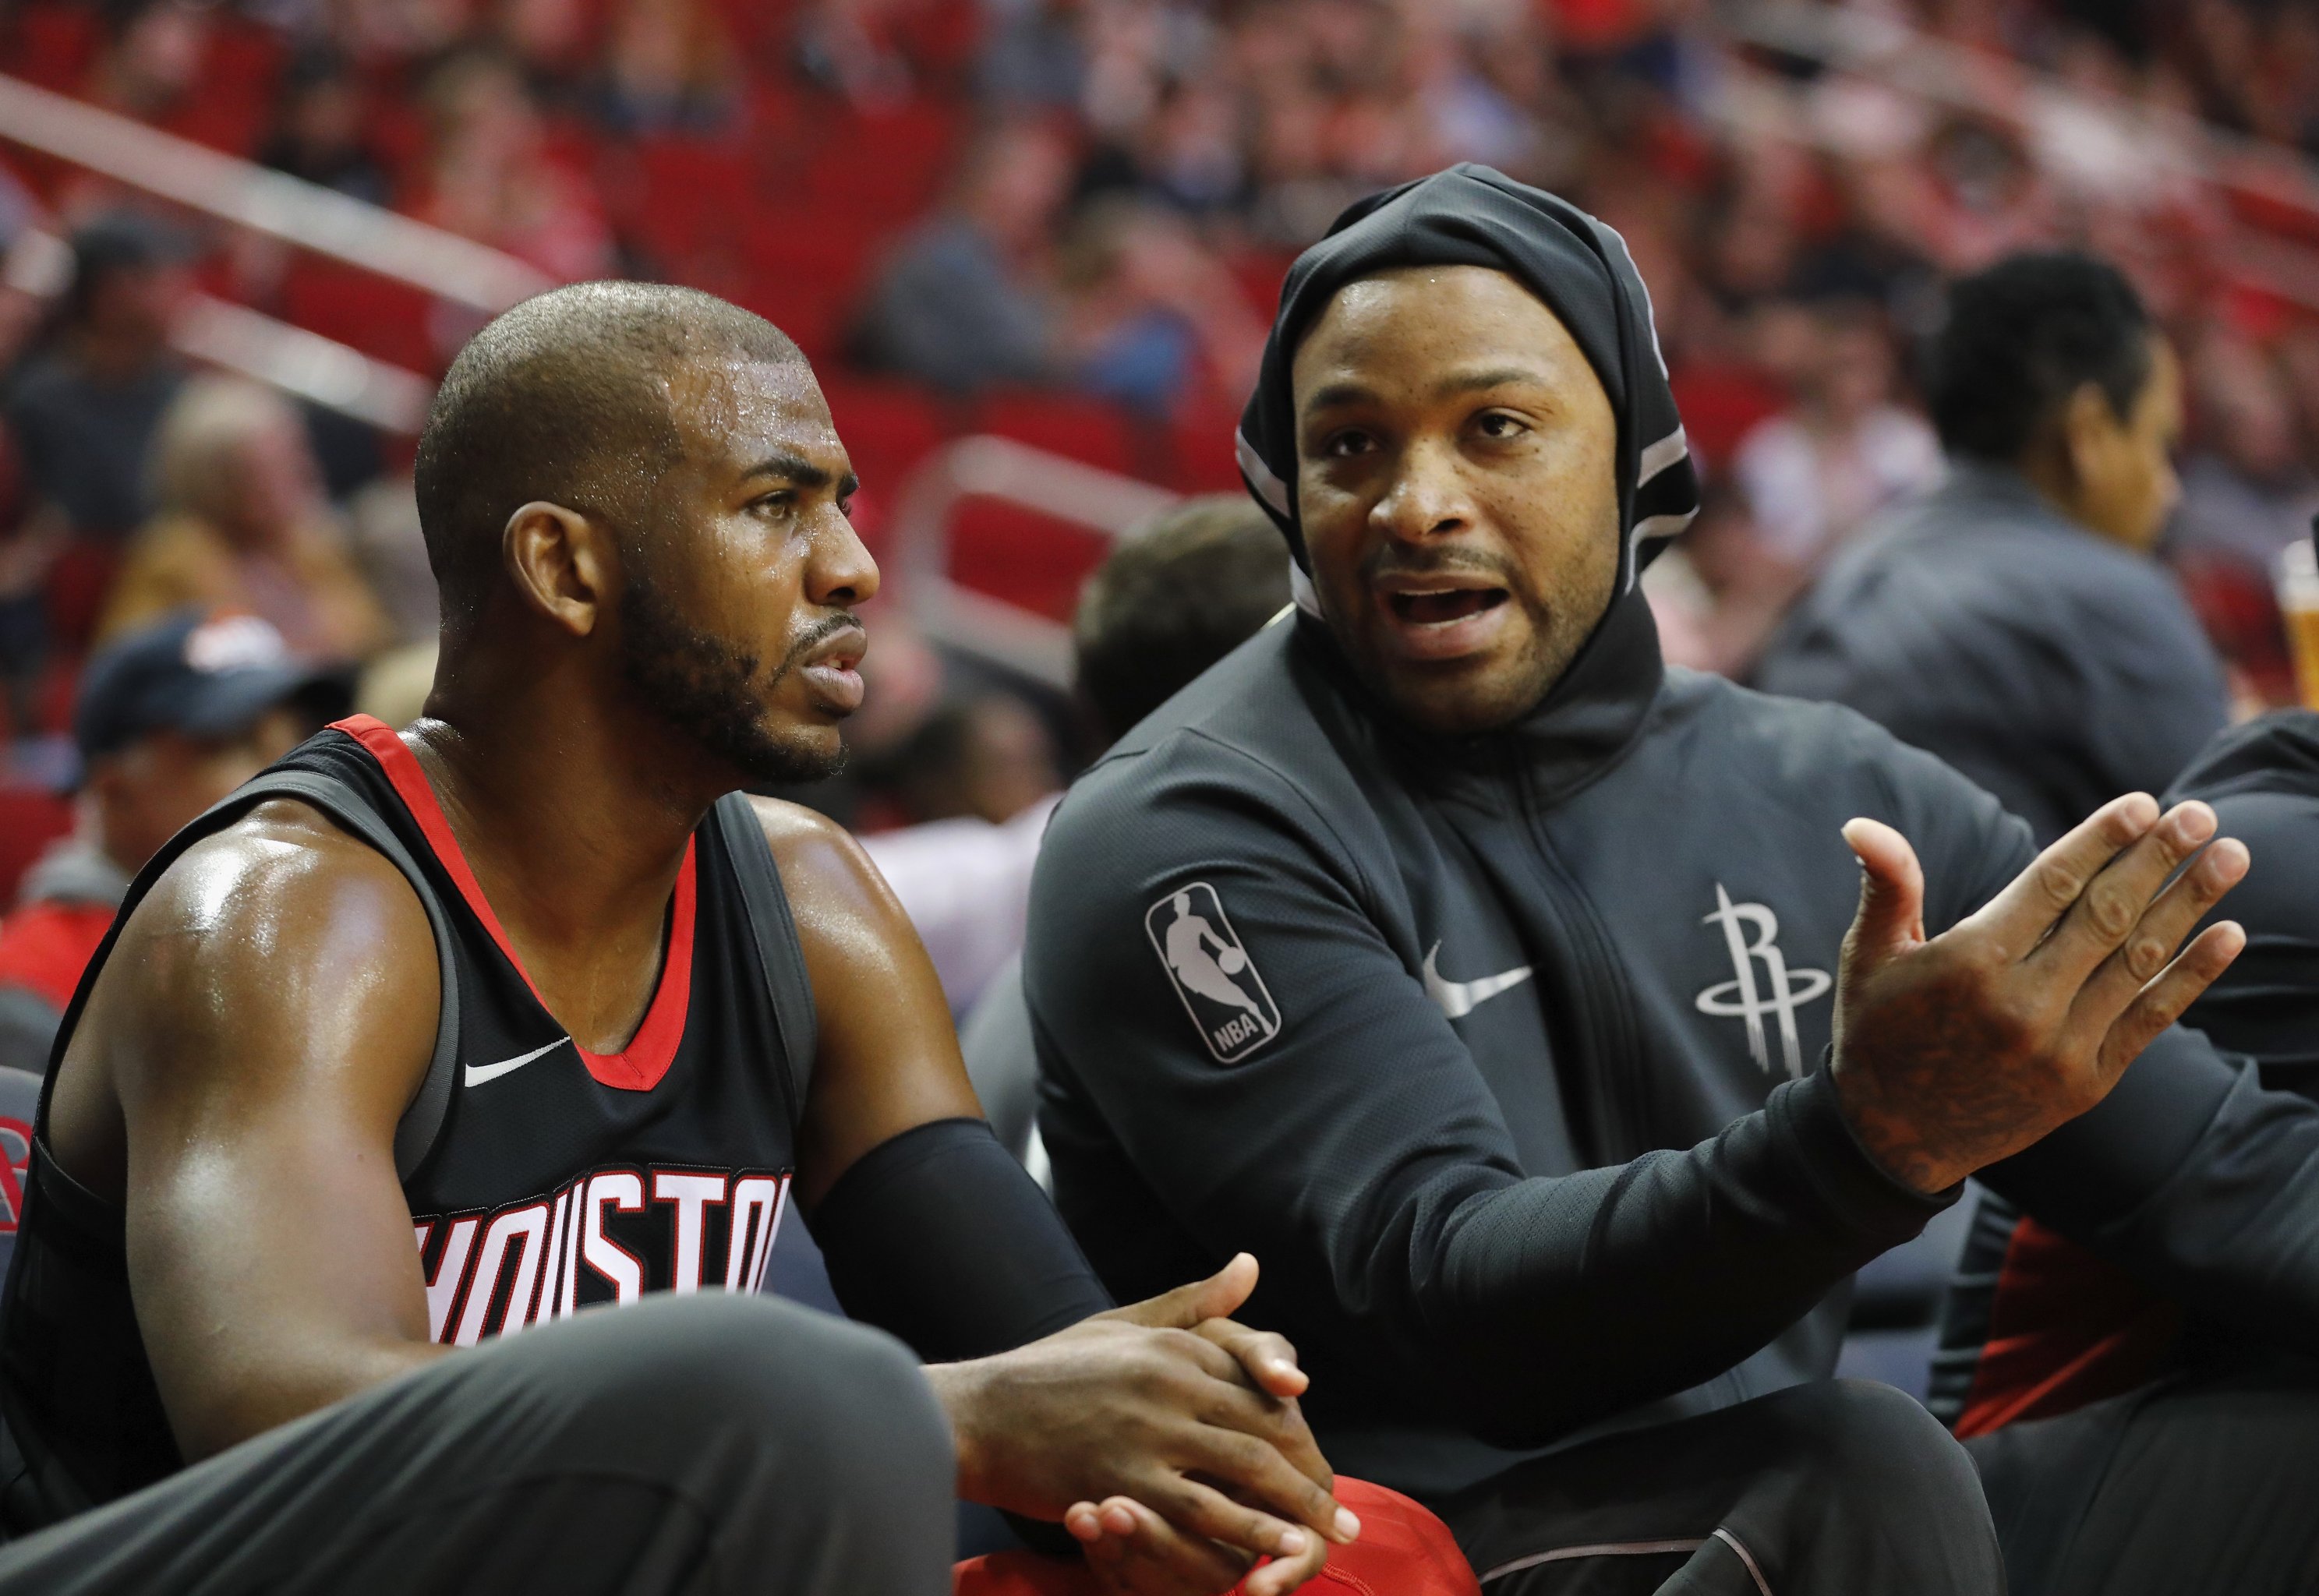 P.J. Tucker reflects on his time in Ukraine as the country remains